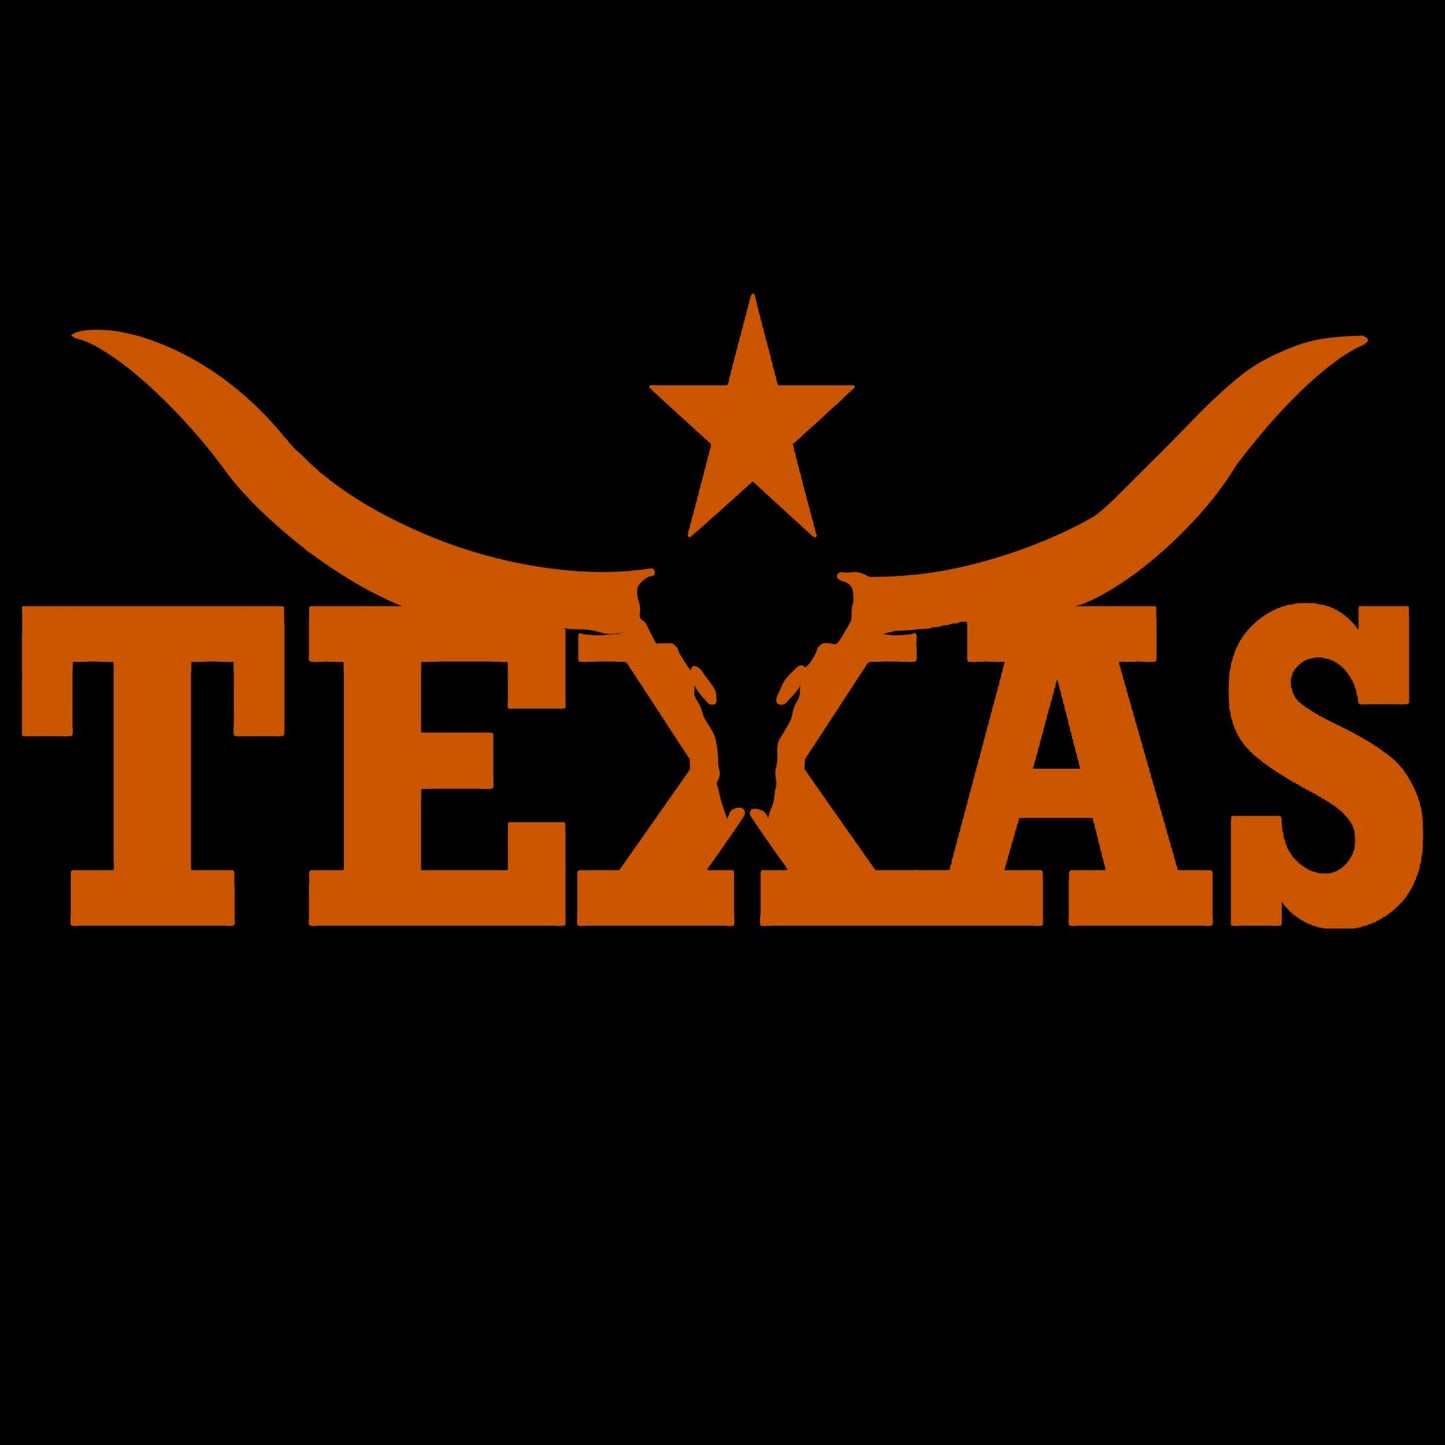 Texas Longhorn Pride T-Shirt | Stylish Texan Apparel Featuring Iconic Longhorn Design | A Majestic Tribute to Texan Heritage and Pride